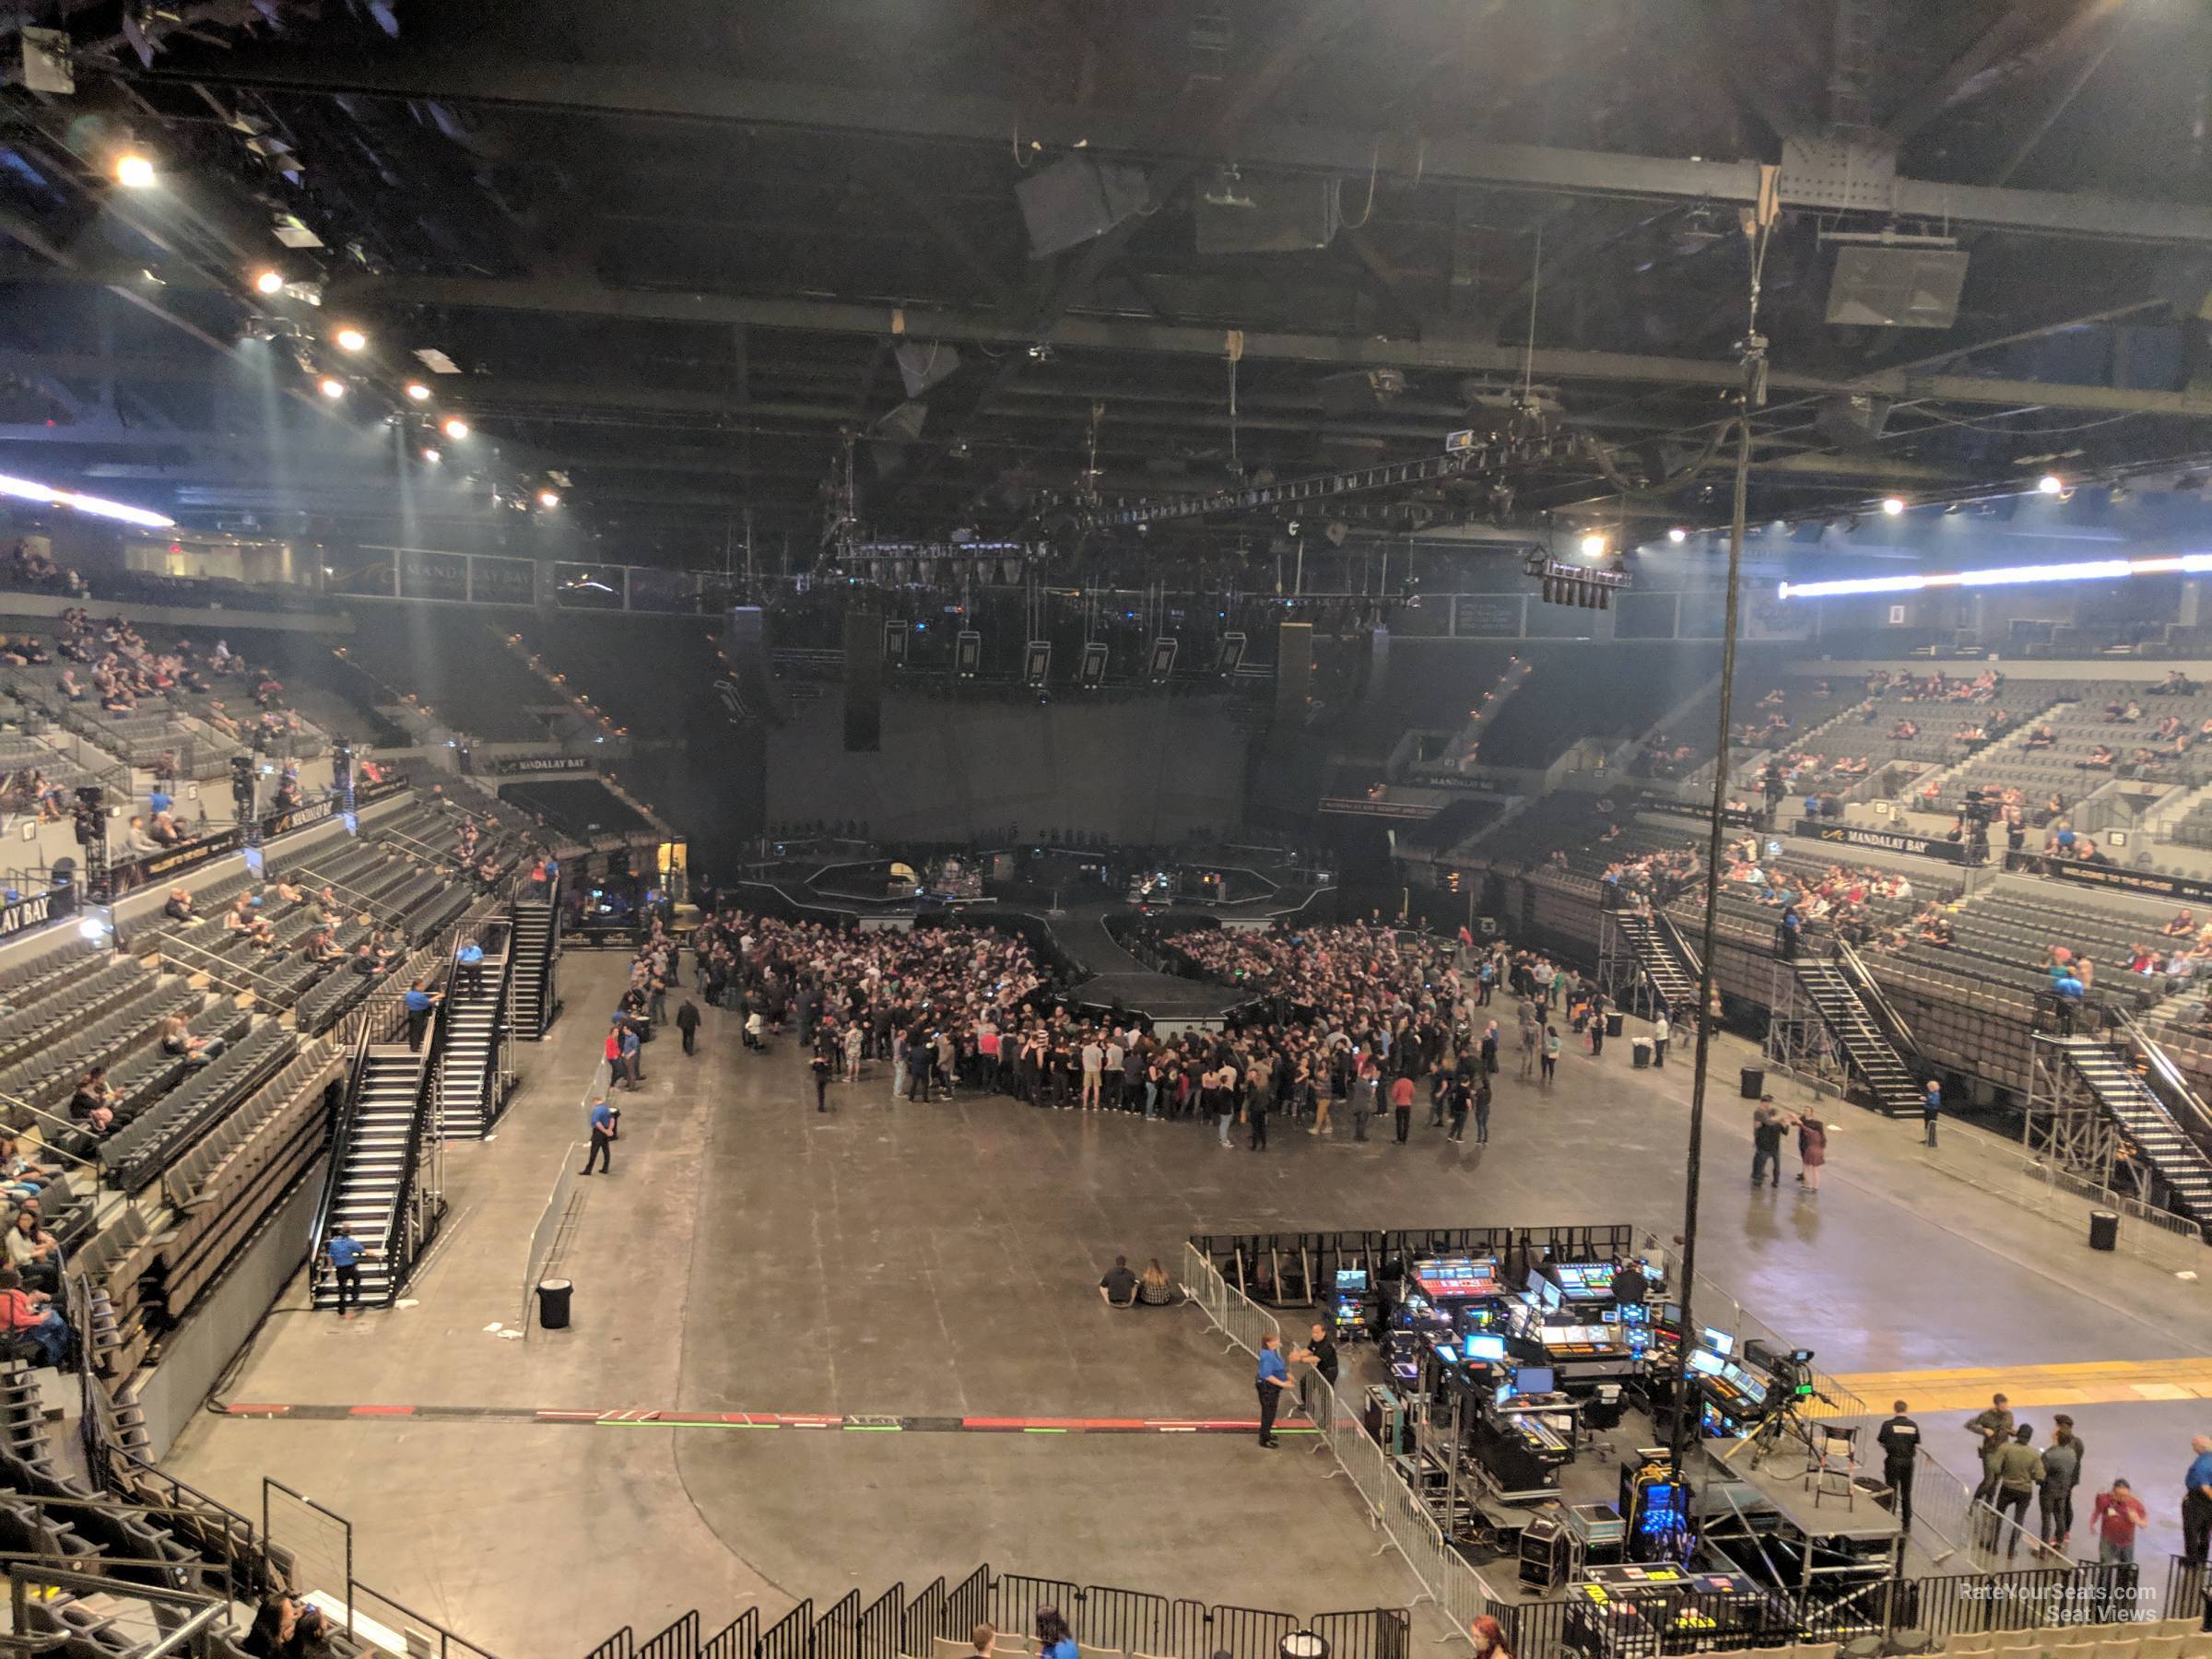 section 212, row e seat view  for concert - michelob ultra arena